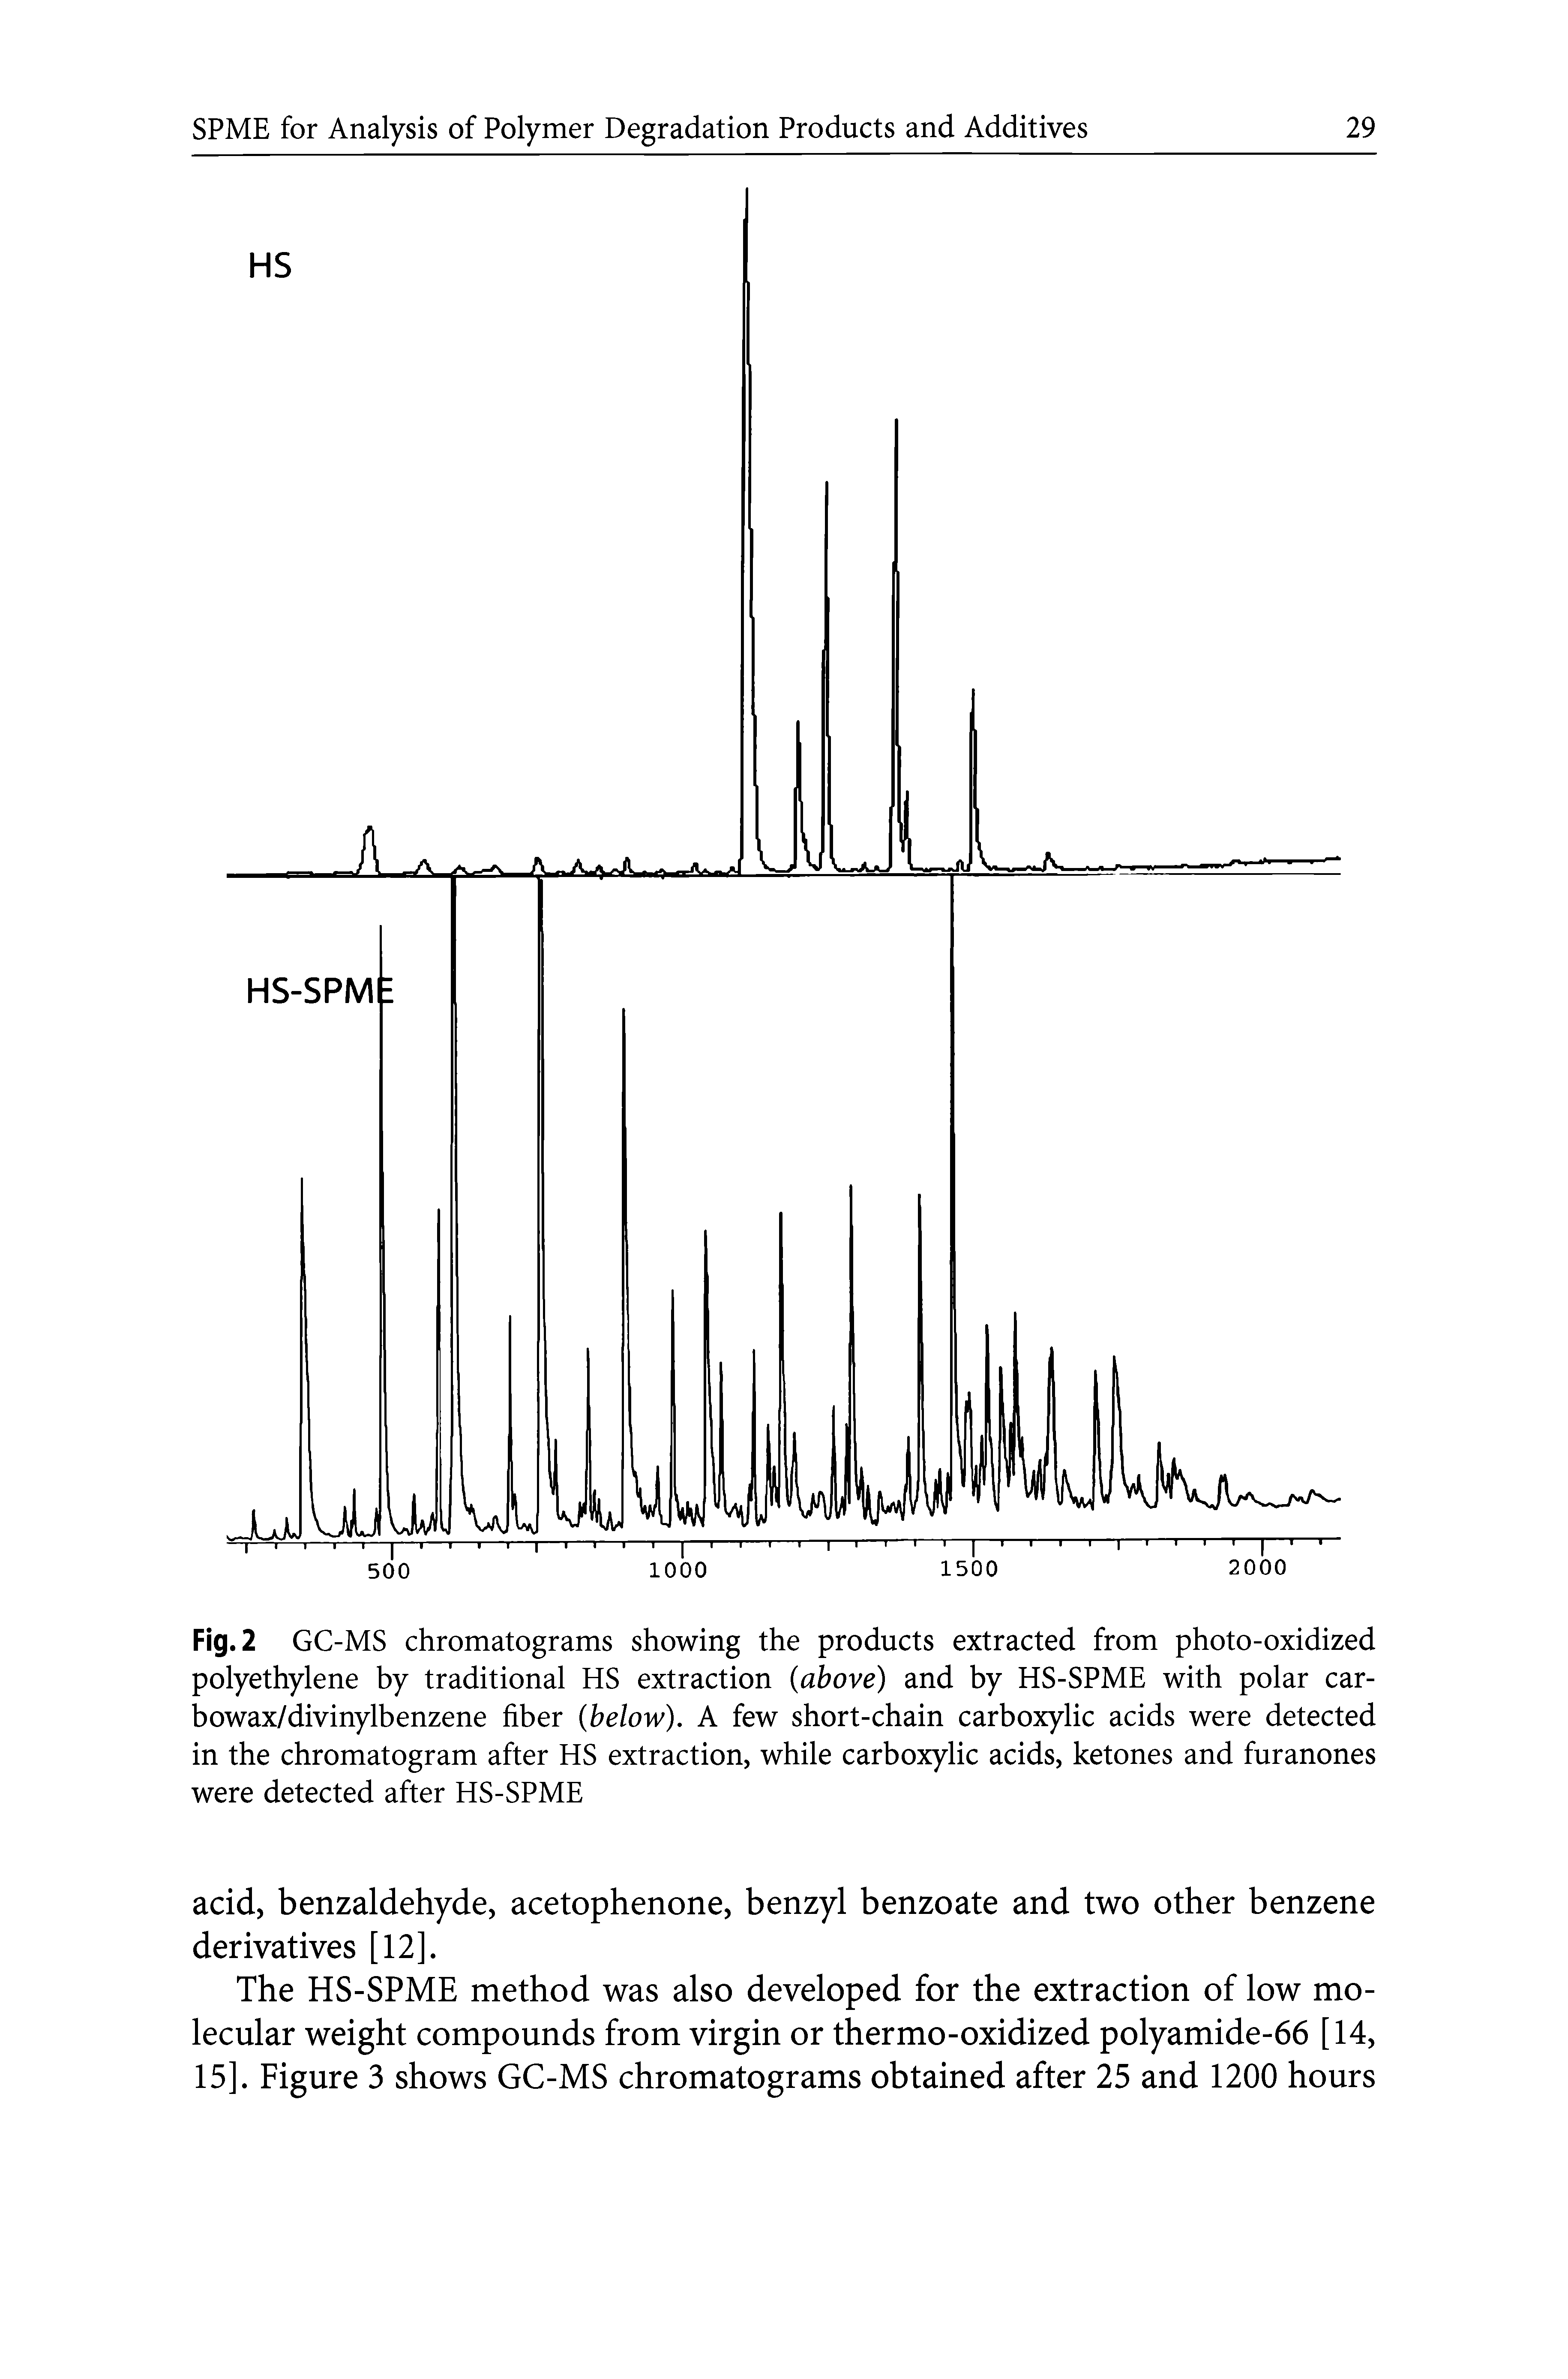 Fig. 2 GC-MS chromatograms showing the products extracted from photo-oxidized polyethylene by traditional HS extraction (above) and by HS-SPME with polar car-bowax/divinylbenzene fiber (below). A few short-chain carboxylic acids were detected in the chromatogram after HS extraction, while carboxylic acids, ketones and furanones were detected after HS-SPME...